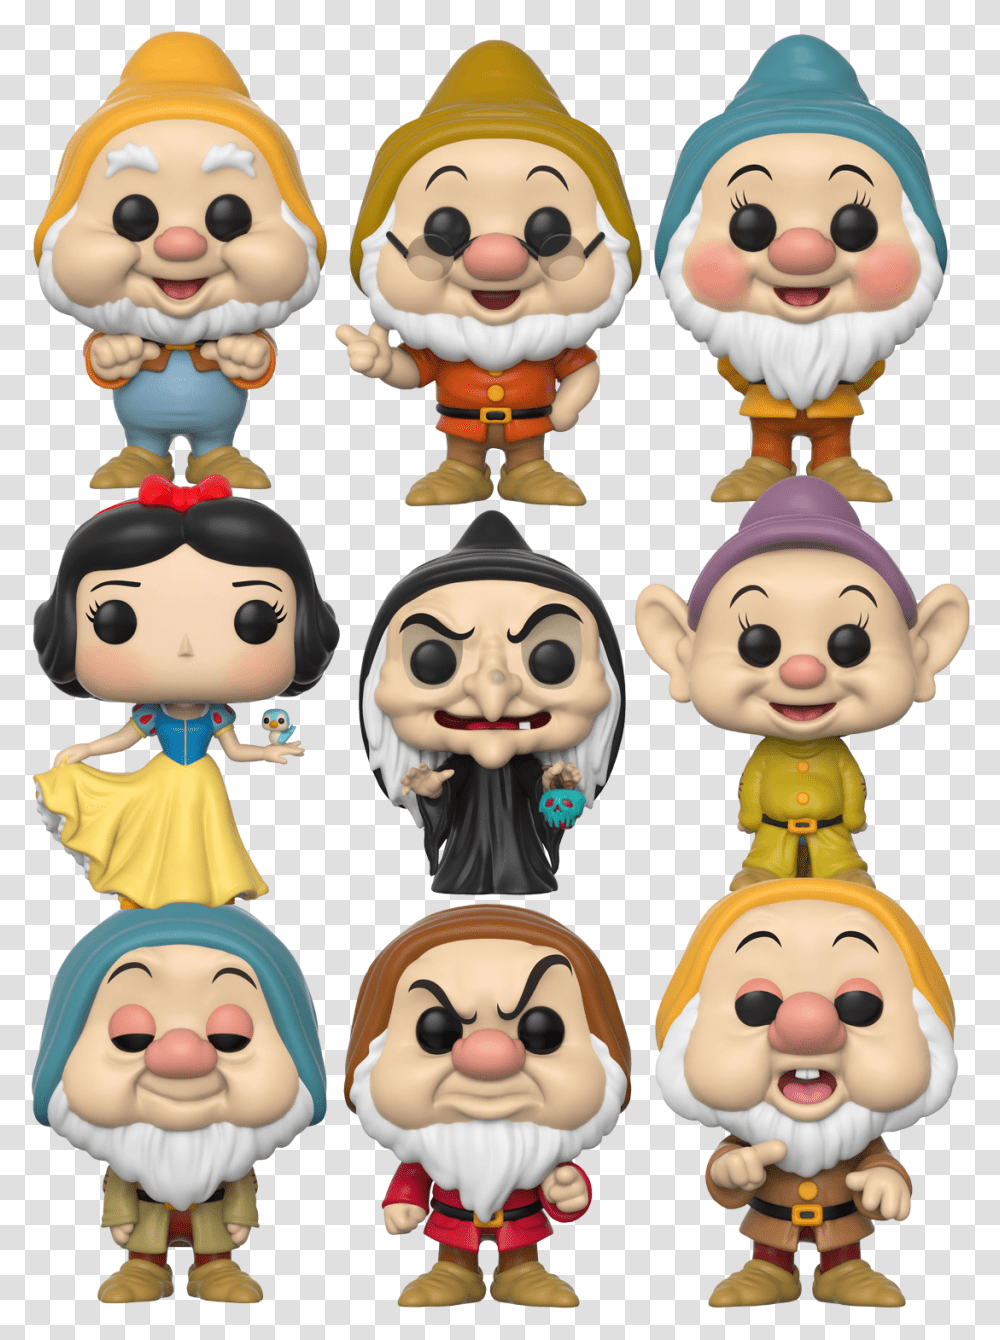 Snow White And The Seven Dwarfs Funko Pop, Head, Toy, Plant, Doll Transparent Png